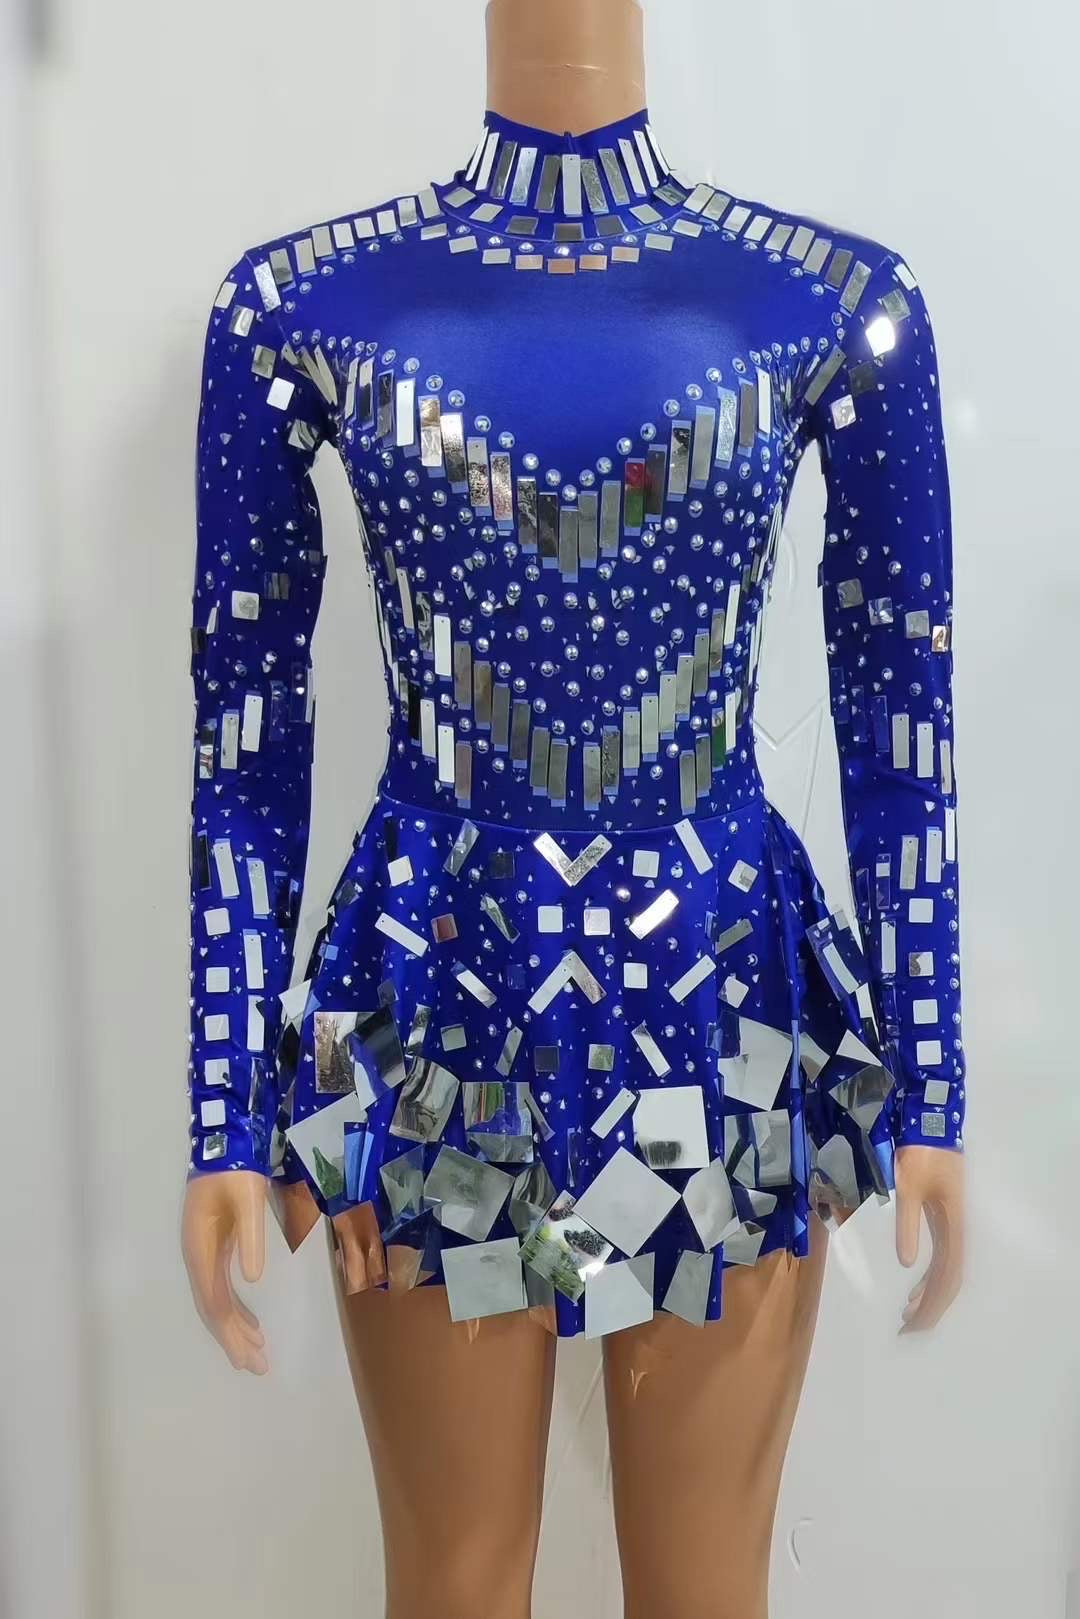 Disco Blue and Silver remix dress